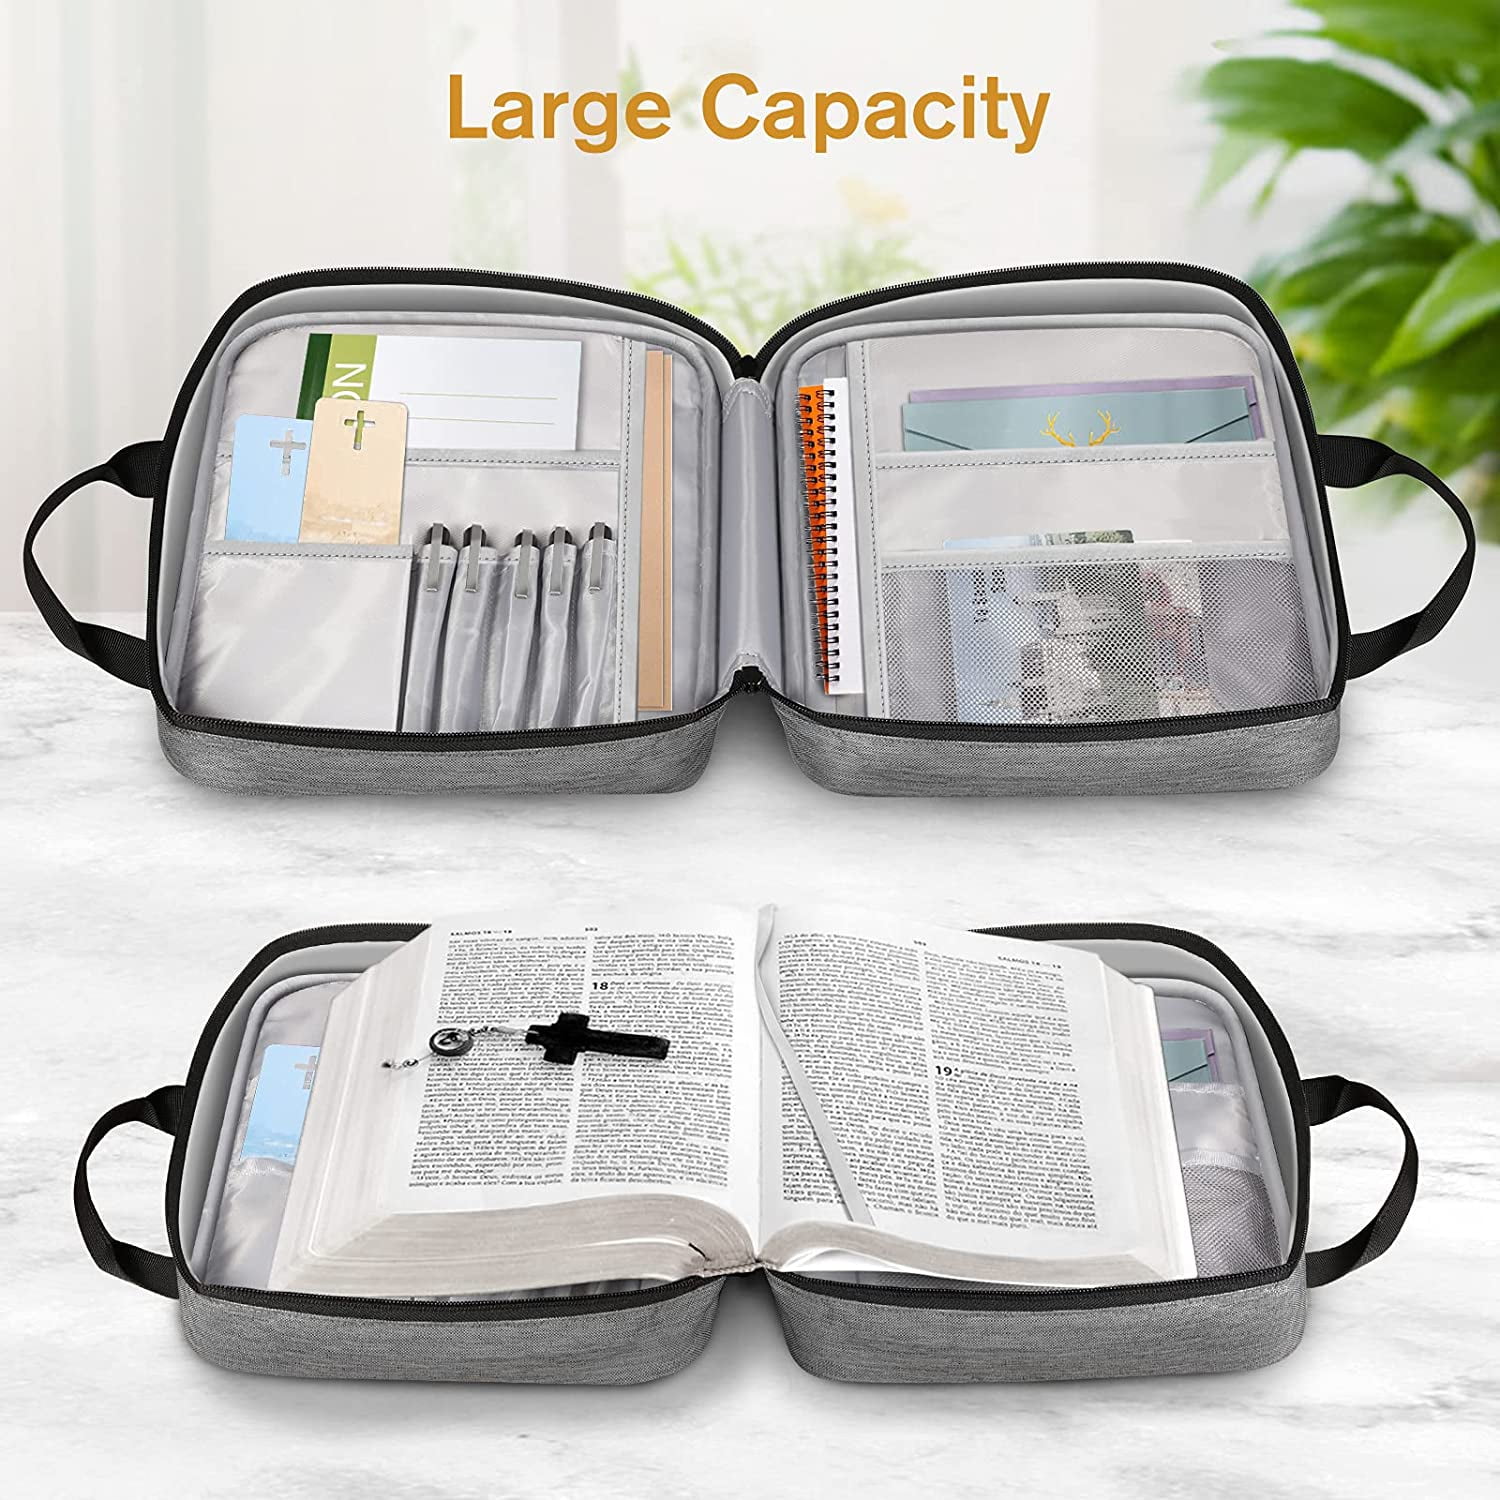 Carrying Book Case Church Bag Bible Protective with Handle and Zippered Pocket Gray FINPAC Bible Cover Perfect Gift for Men Women Father Kids 